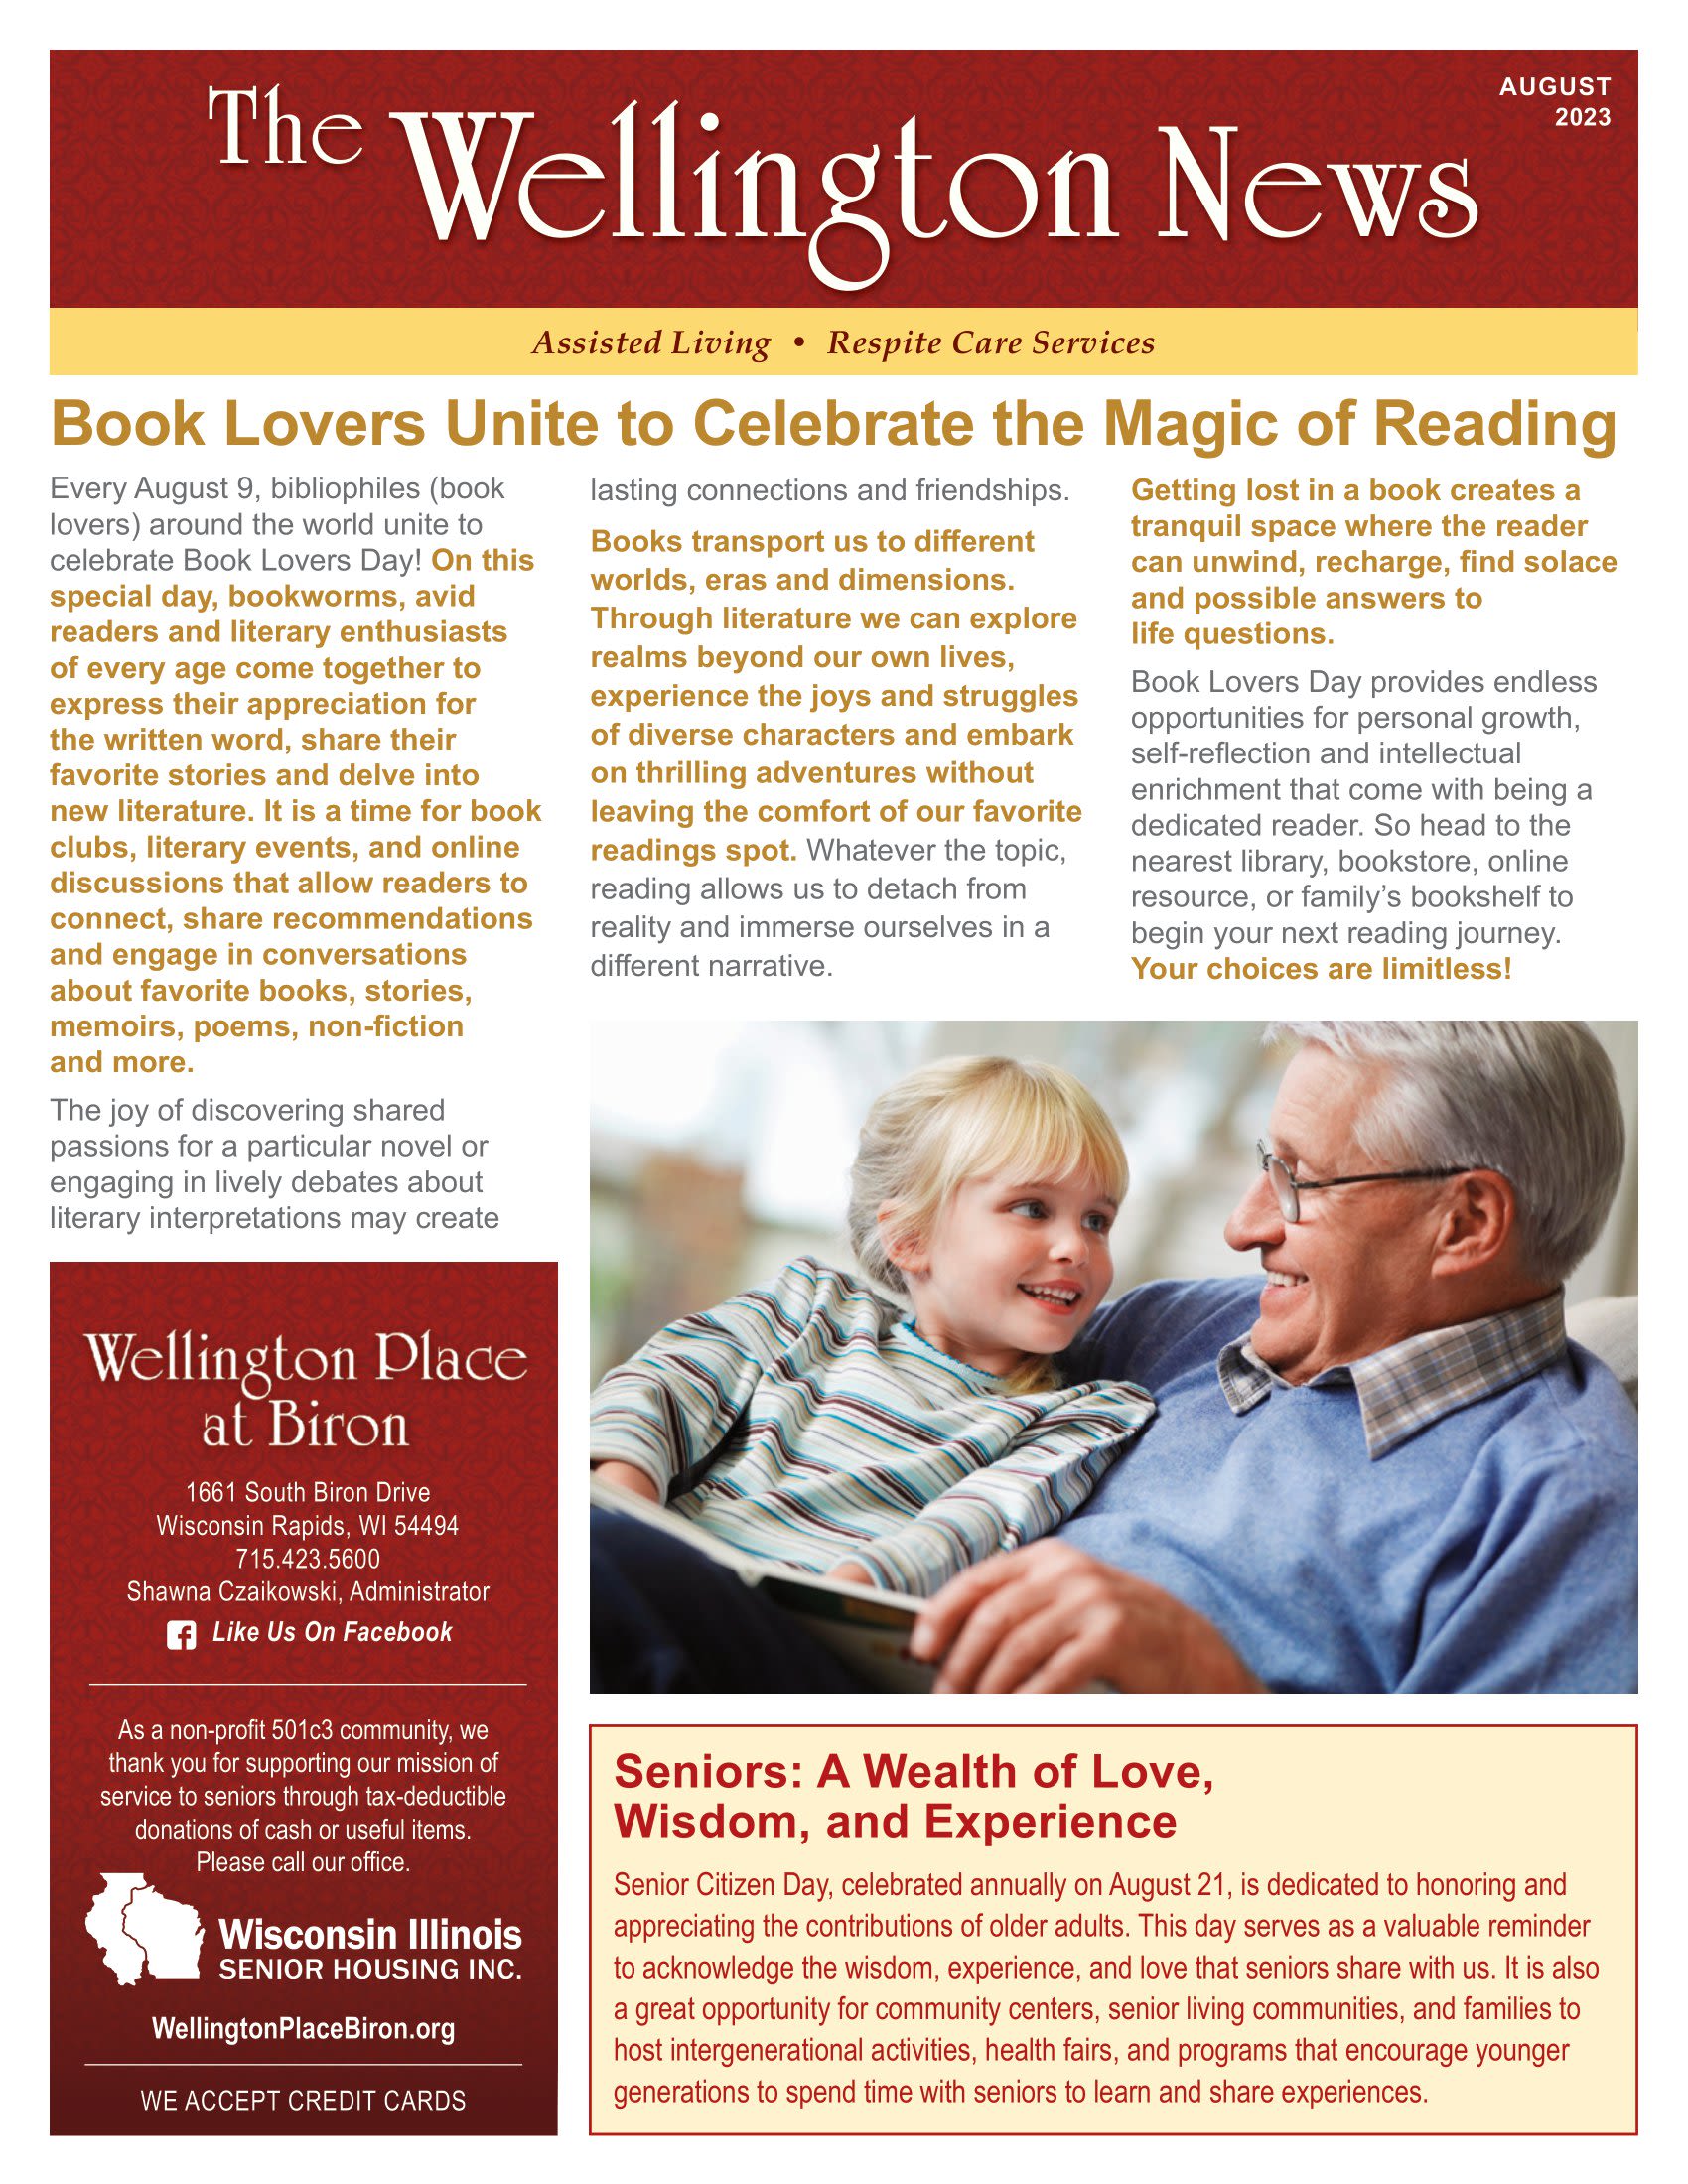 August 2023 Newsletter at Wellington Place at Biron in Wisconsin Rapids, Wisconsin